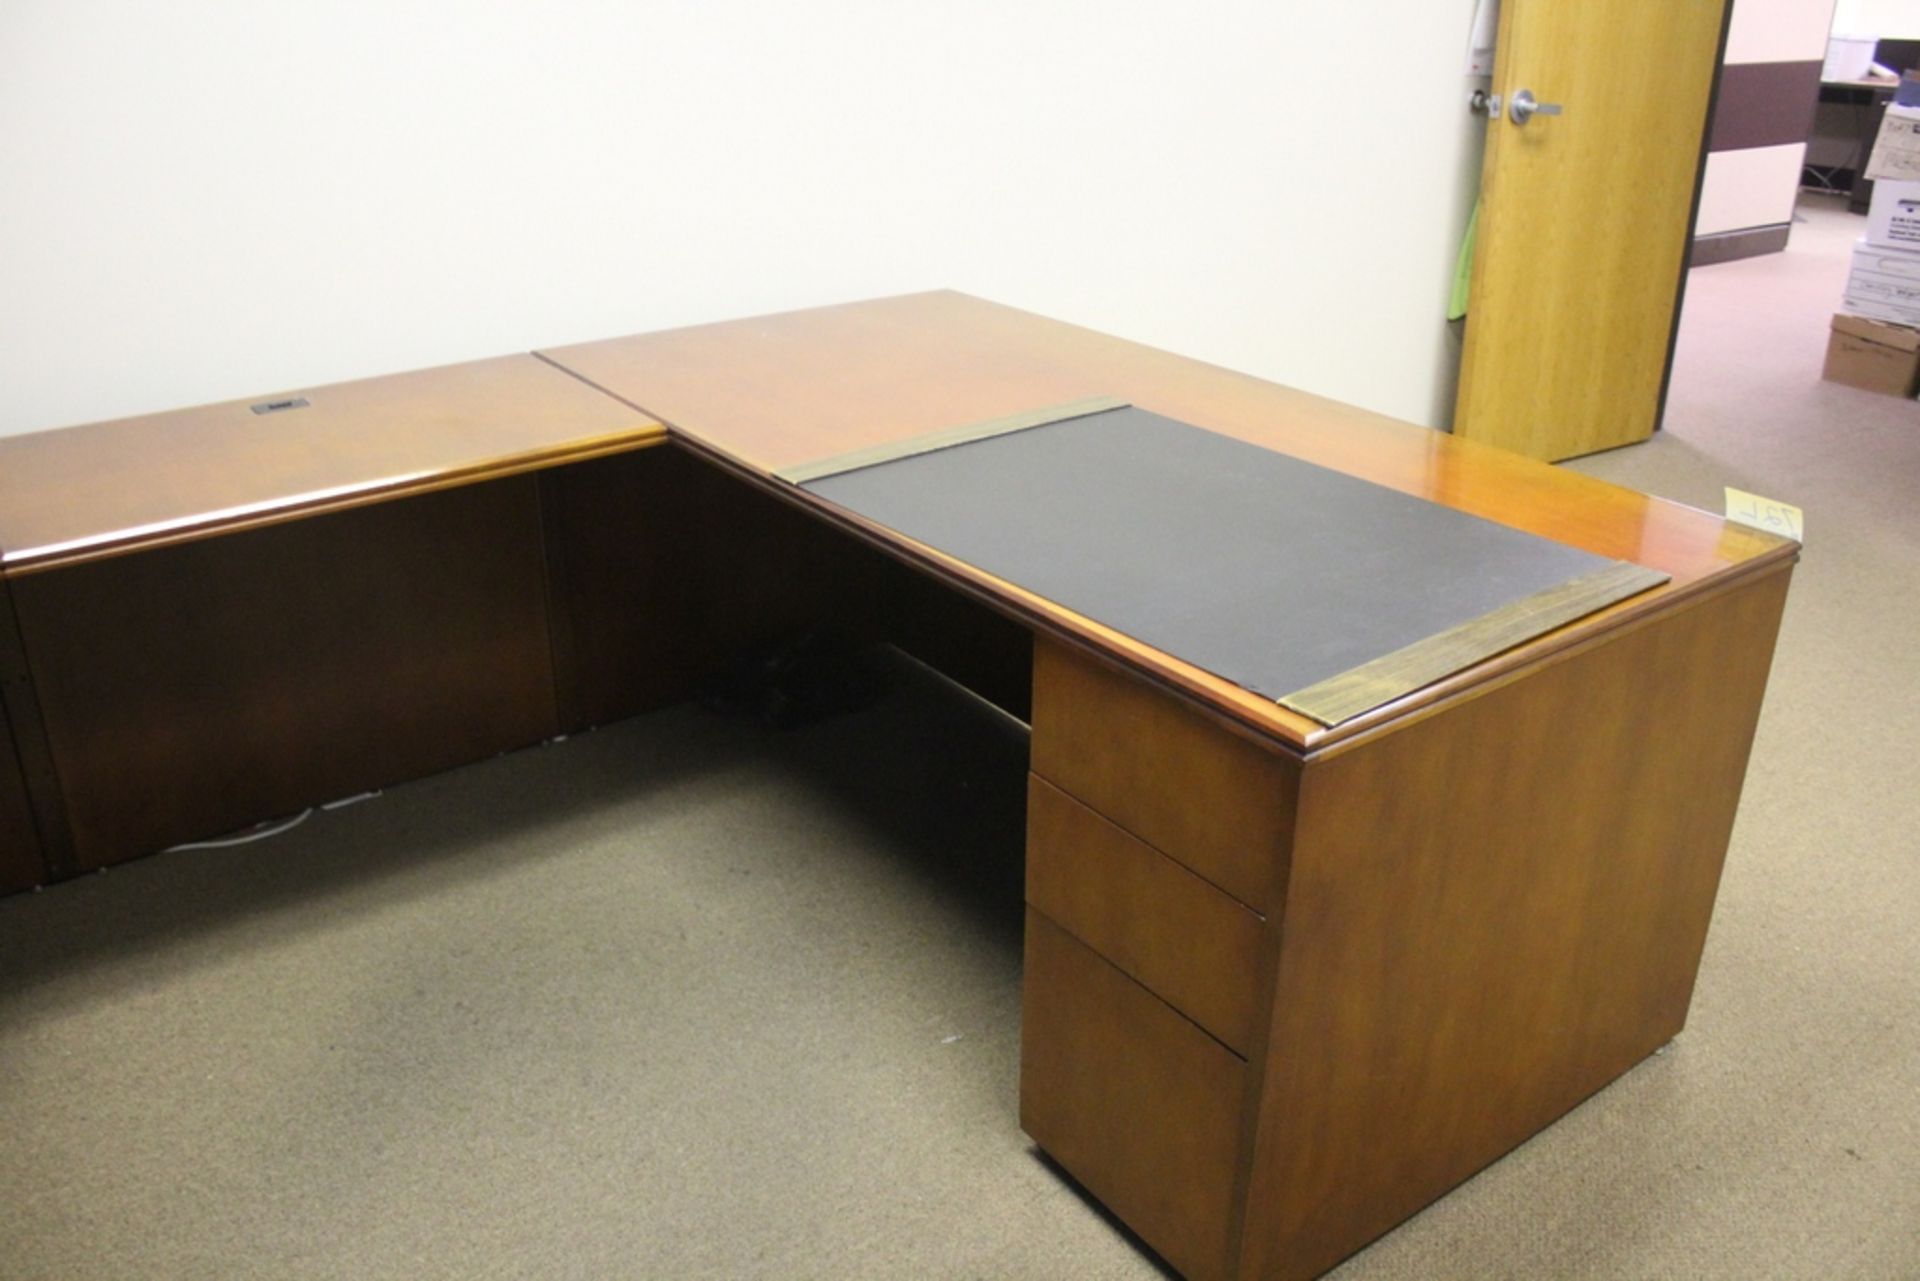 U-SHAPED OFFICE DESK, 114" X 72" WITH CREDENZA - Image 4 of 5